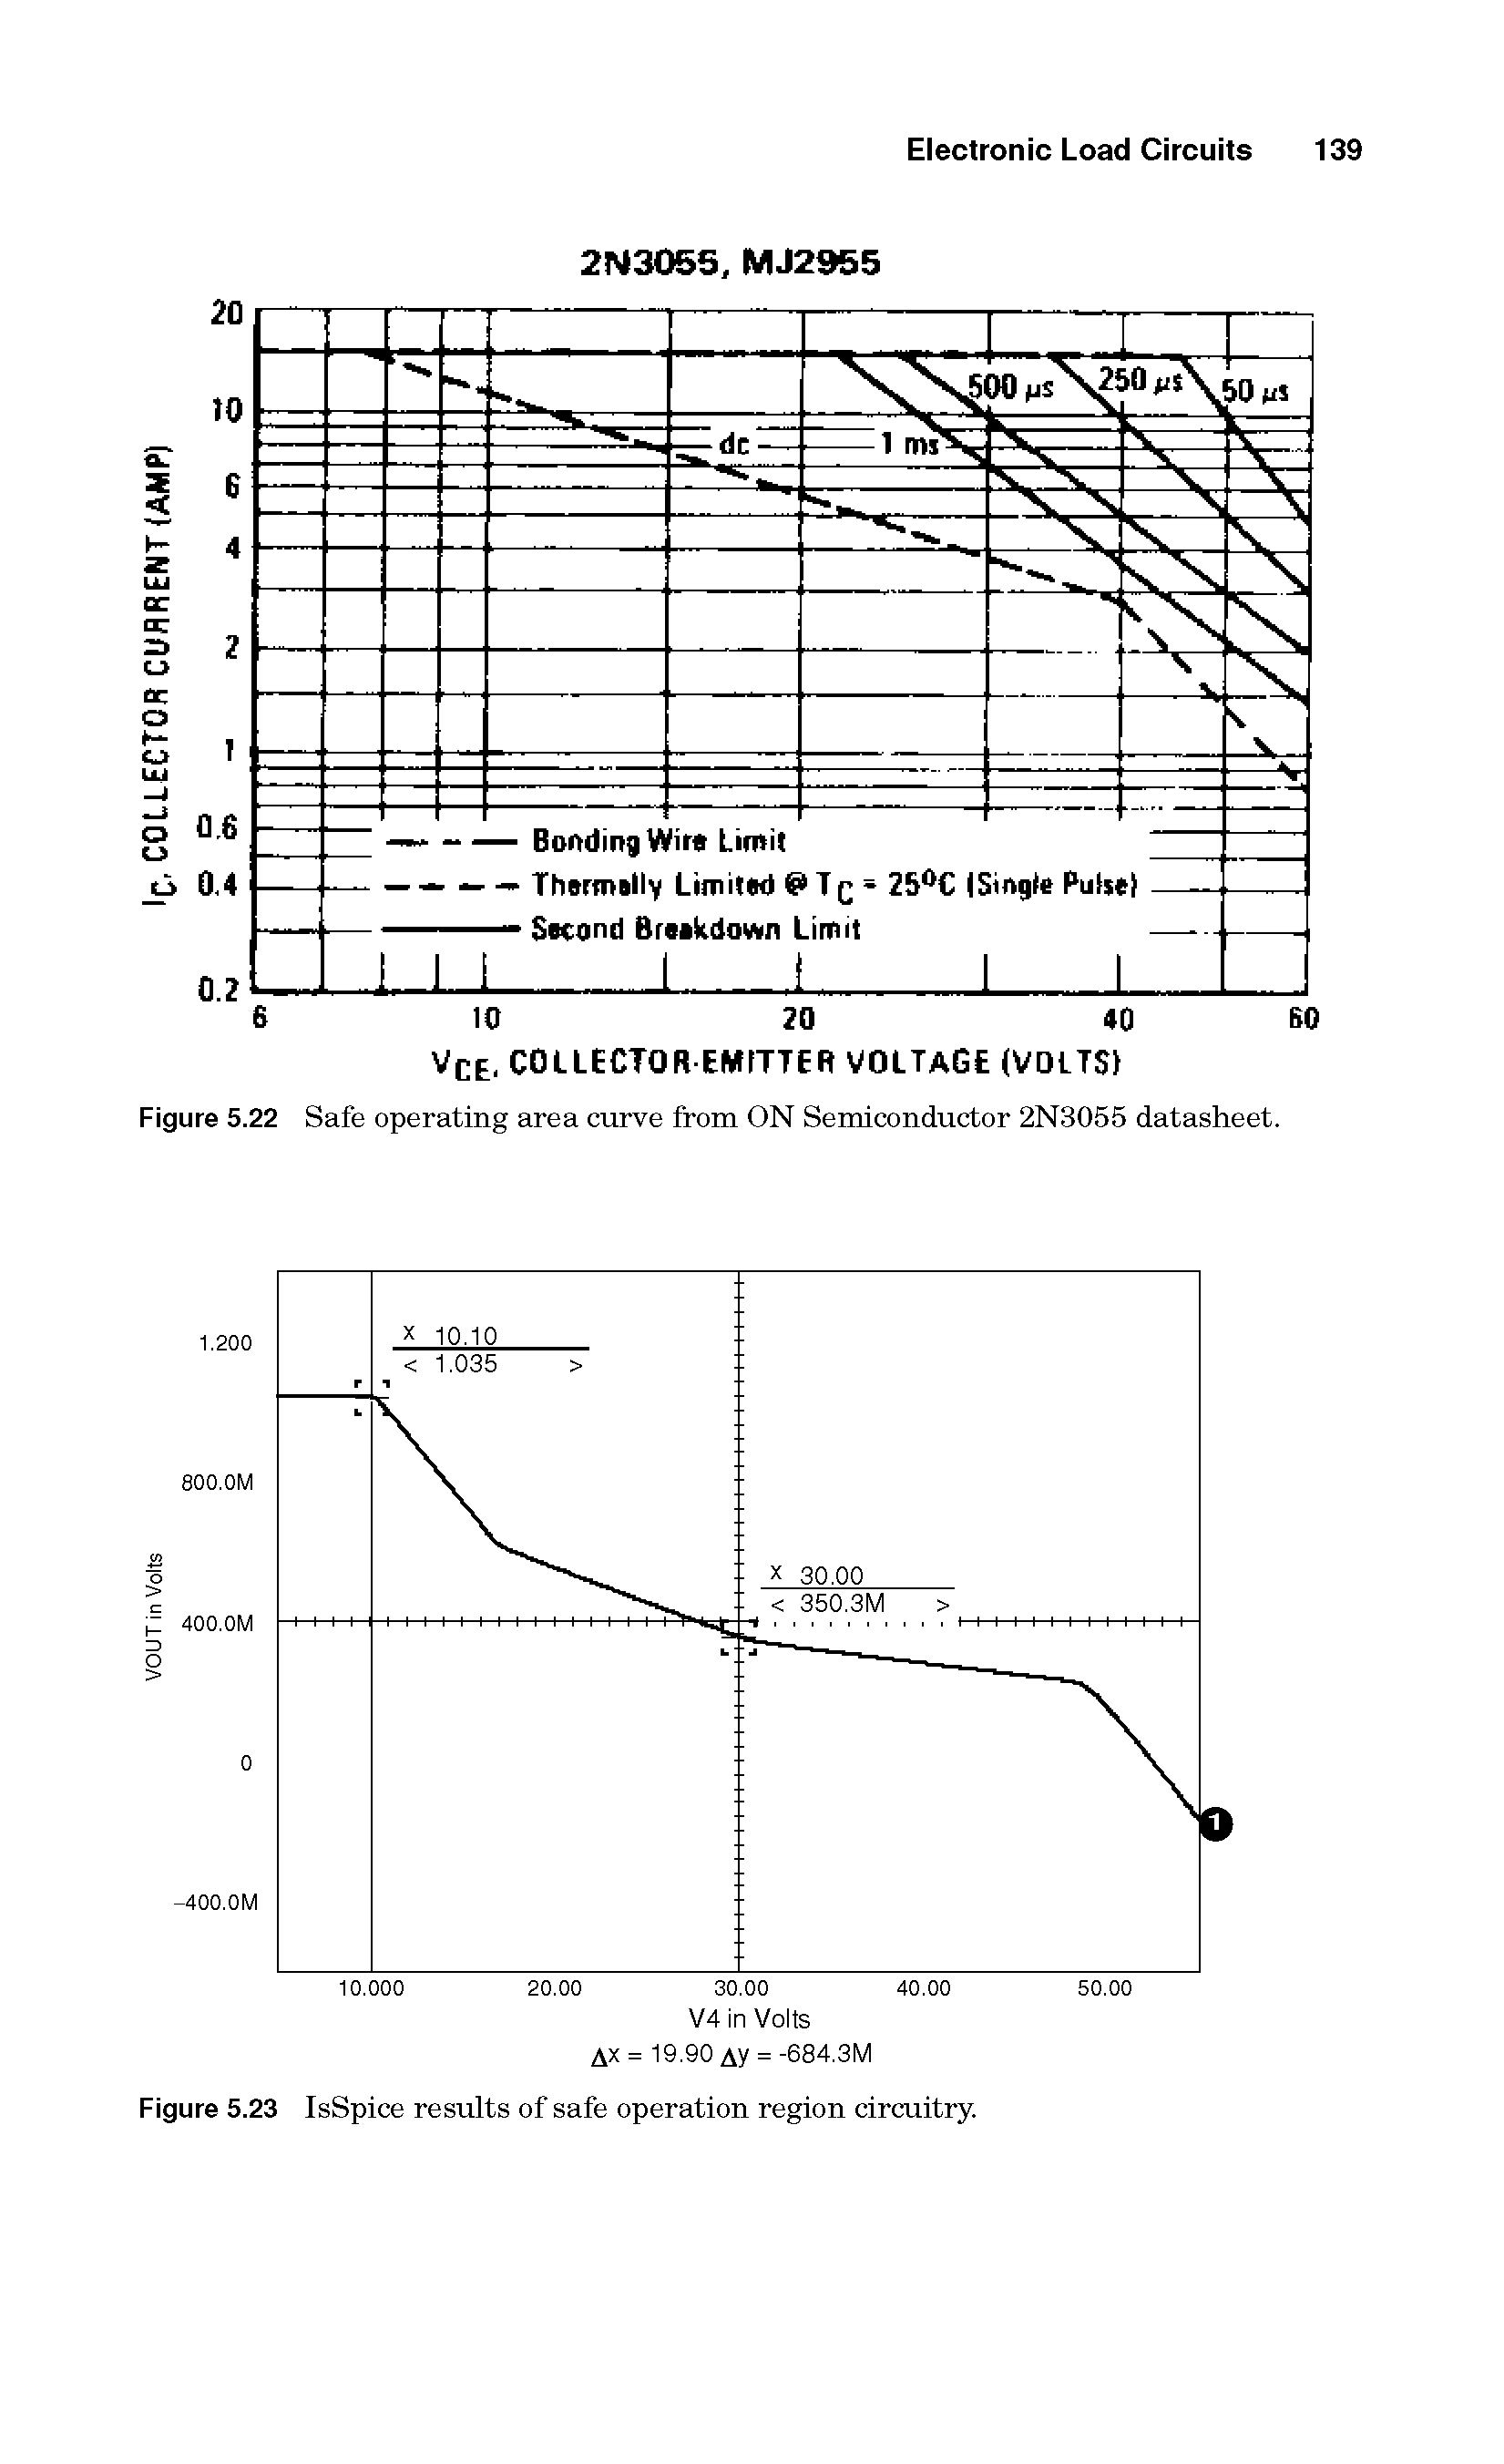 Figure 5.22 Safe operating area curve from ON Semiconductor 2N3055 datasheet.